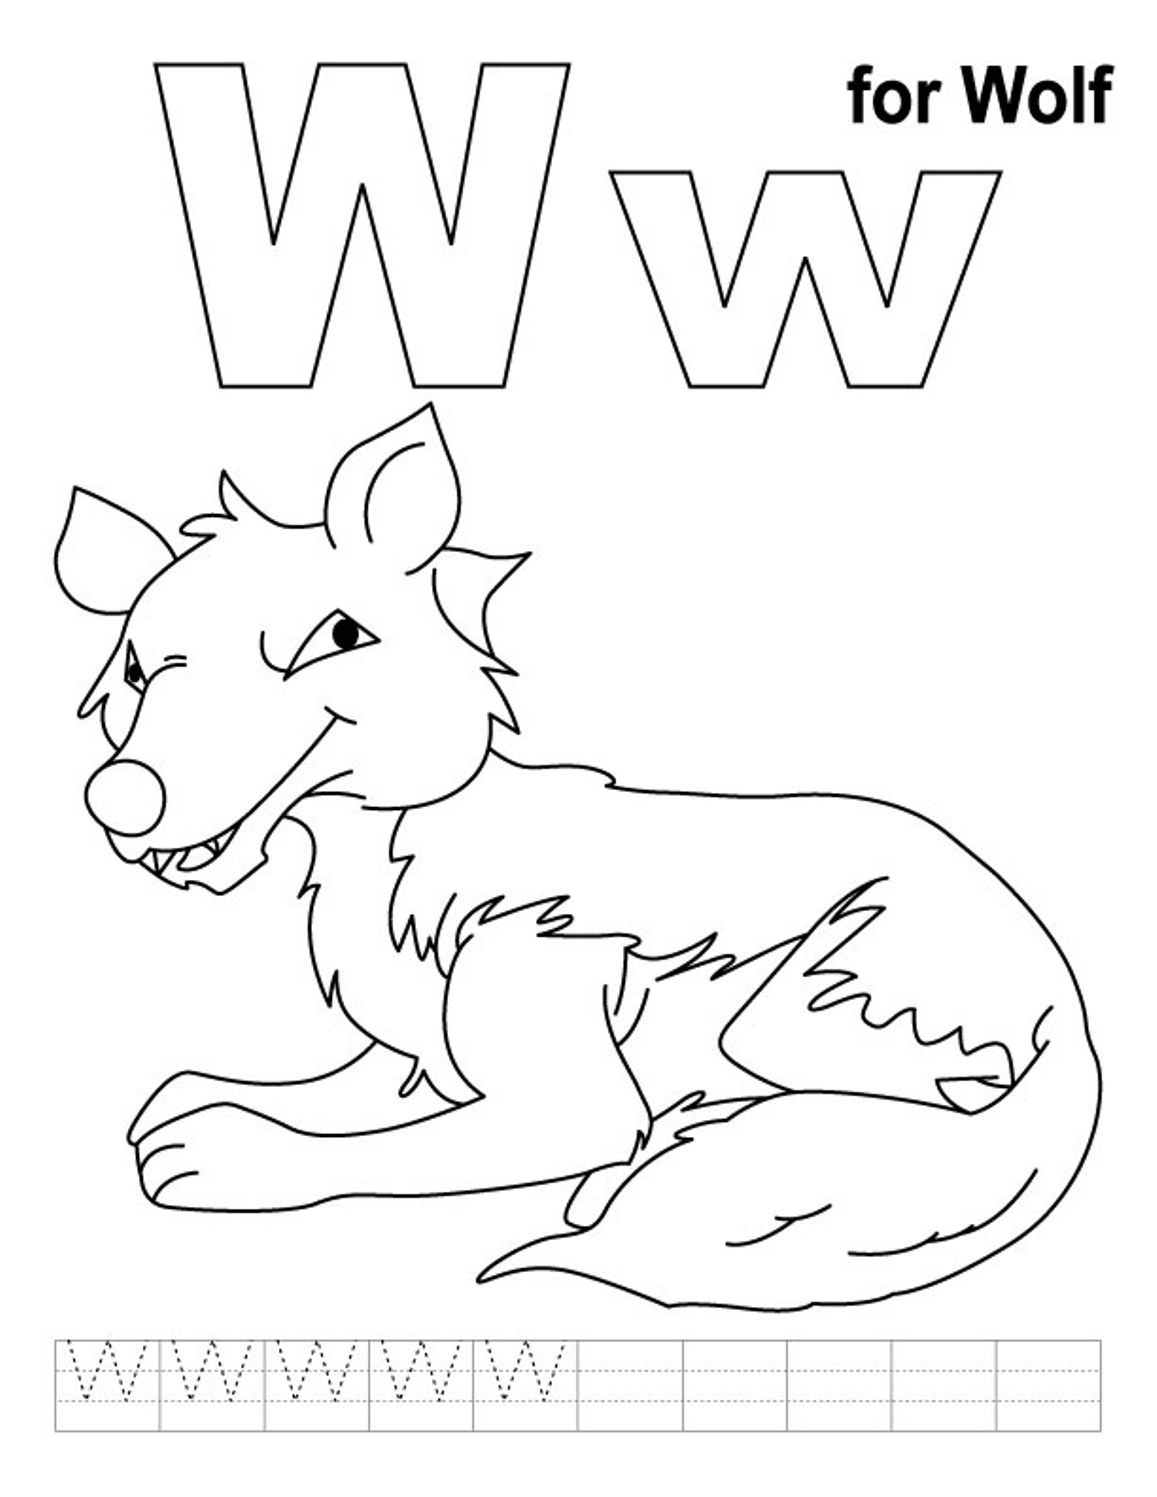 Wolf Free Alphabet Coloring Page